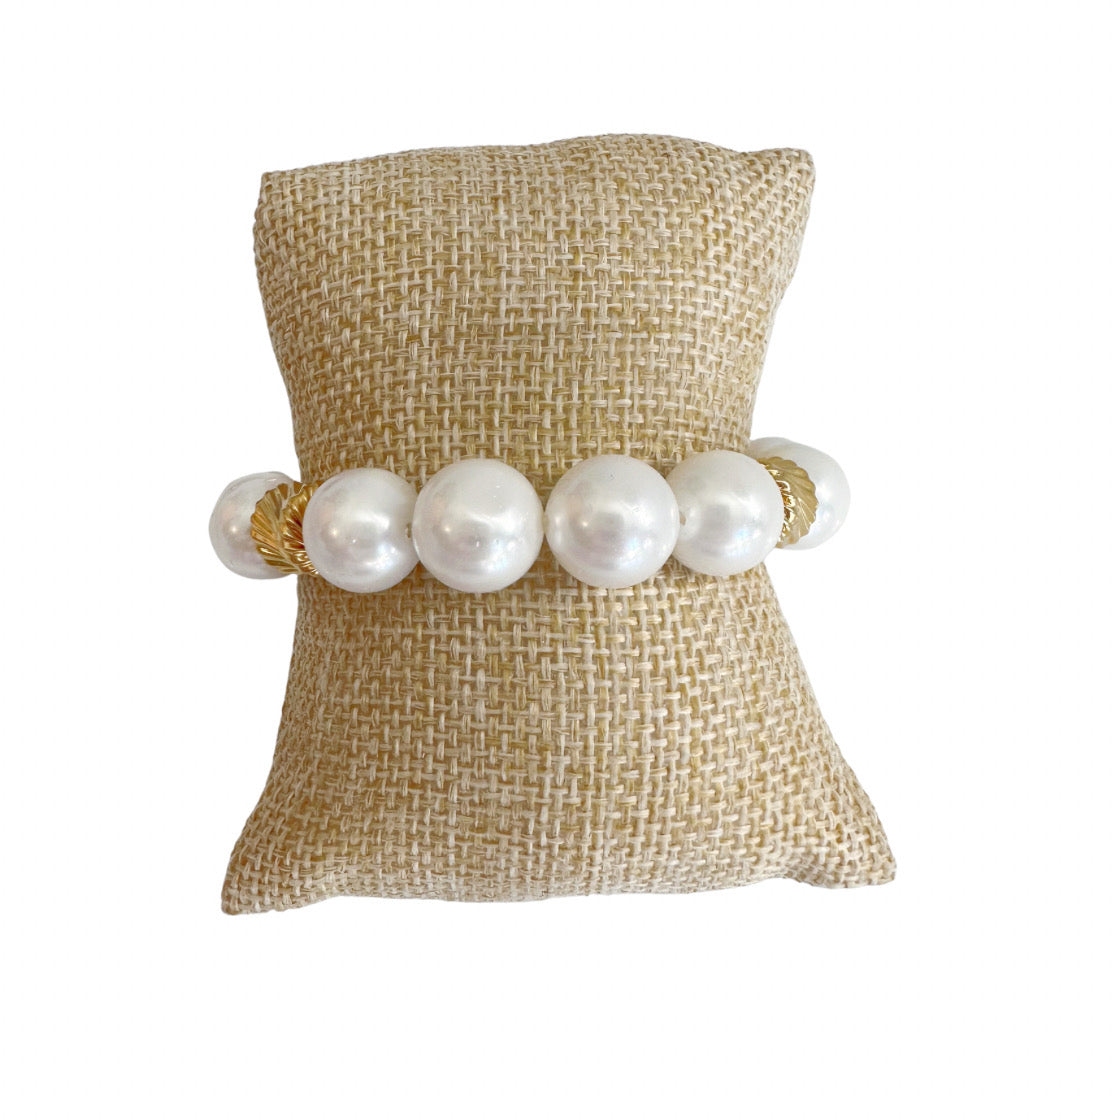 Limited Edition Mother of Pearl Bracelet